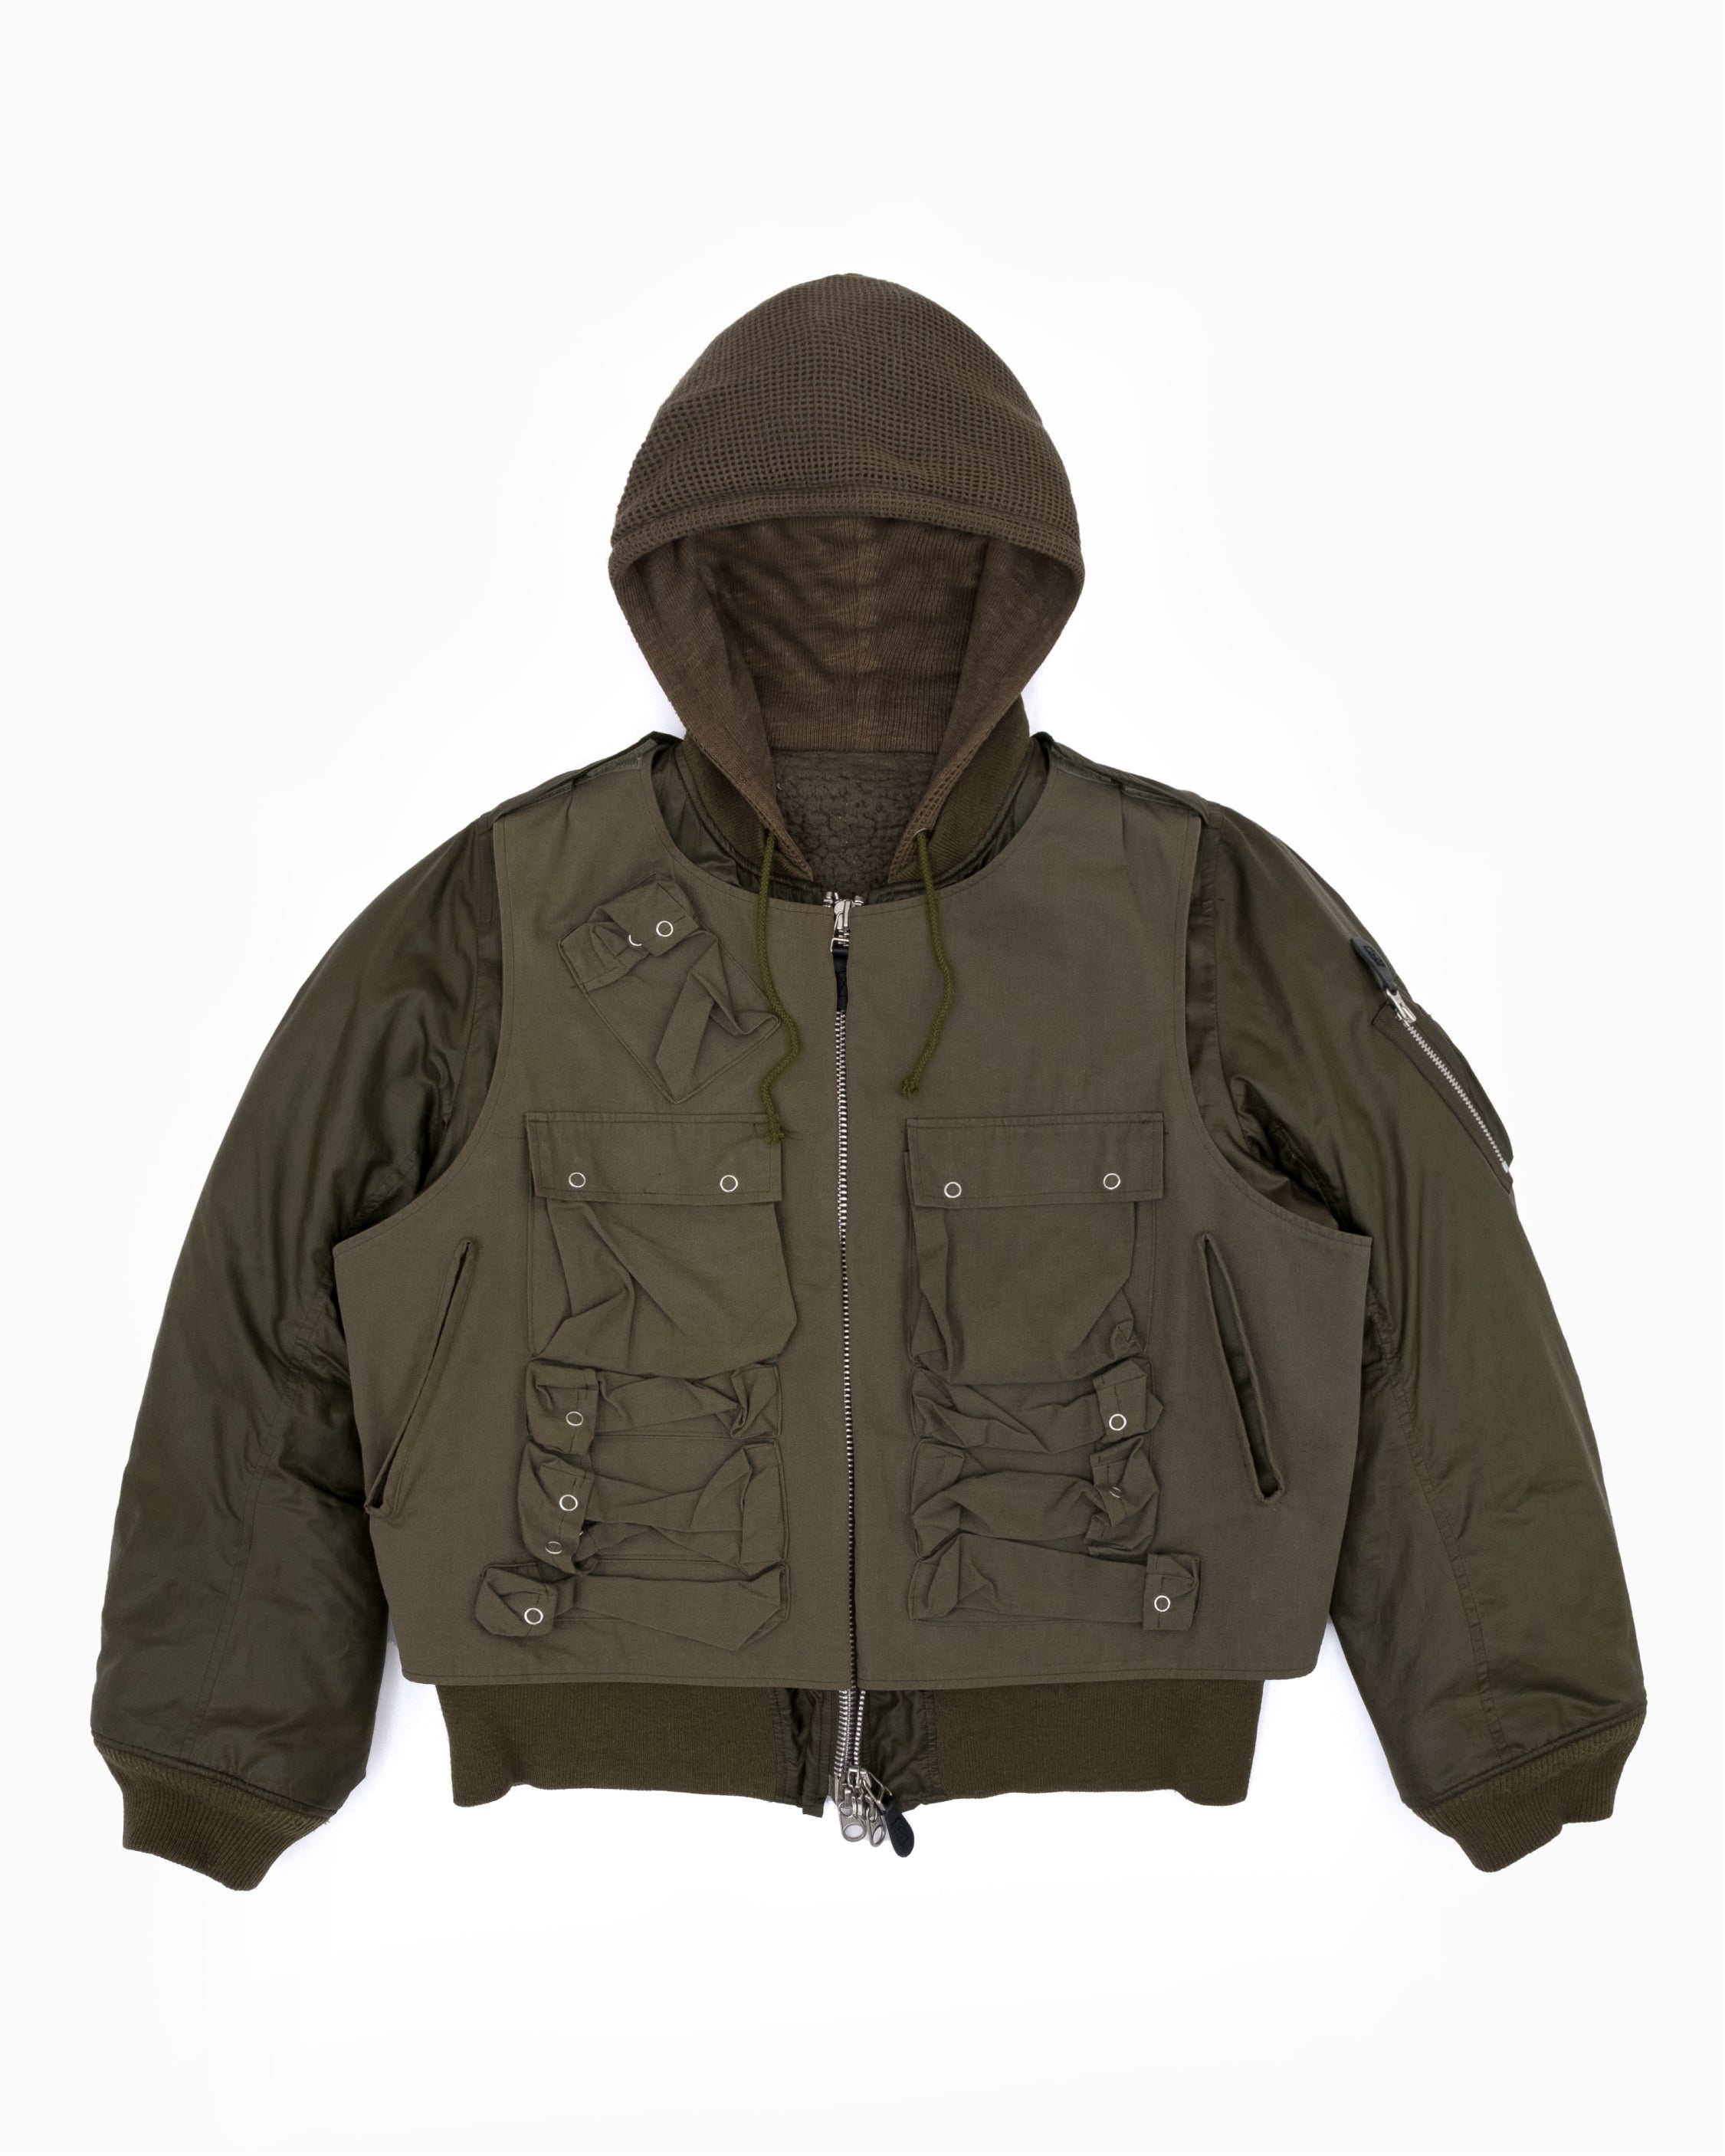 Undercover x Vandalize AW06 Bomber Jacket – Final Layer